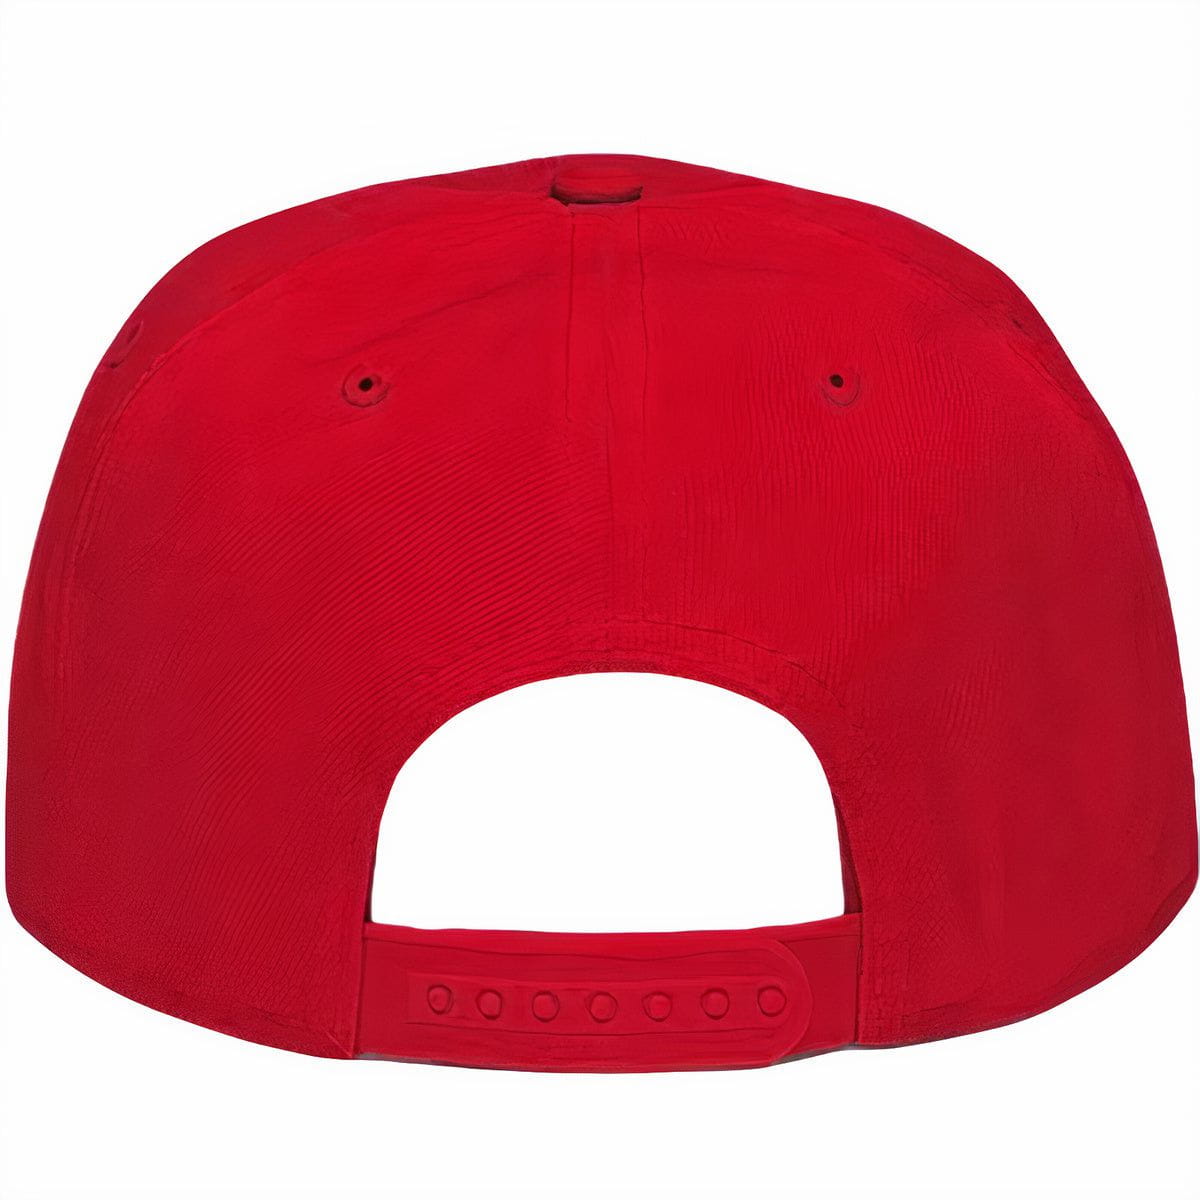 Red Taxi 12s Snapback Hat - Jordan 12 Red Taxis Hats - Crazy Baws